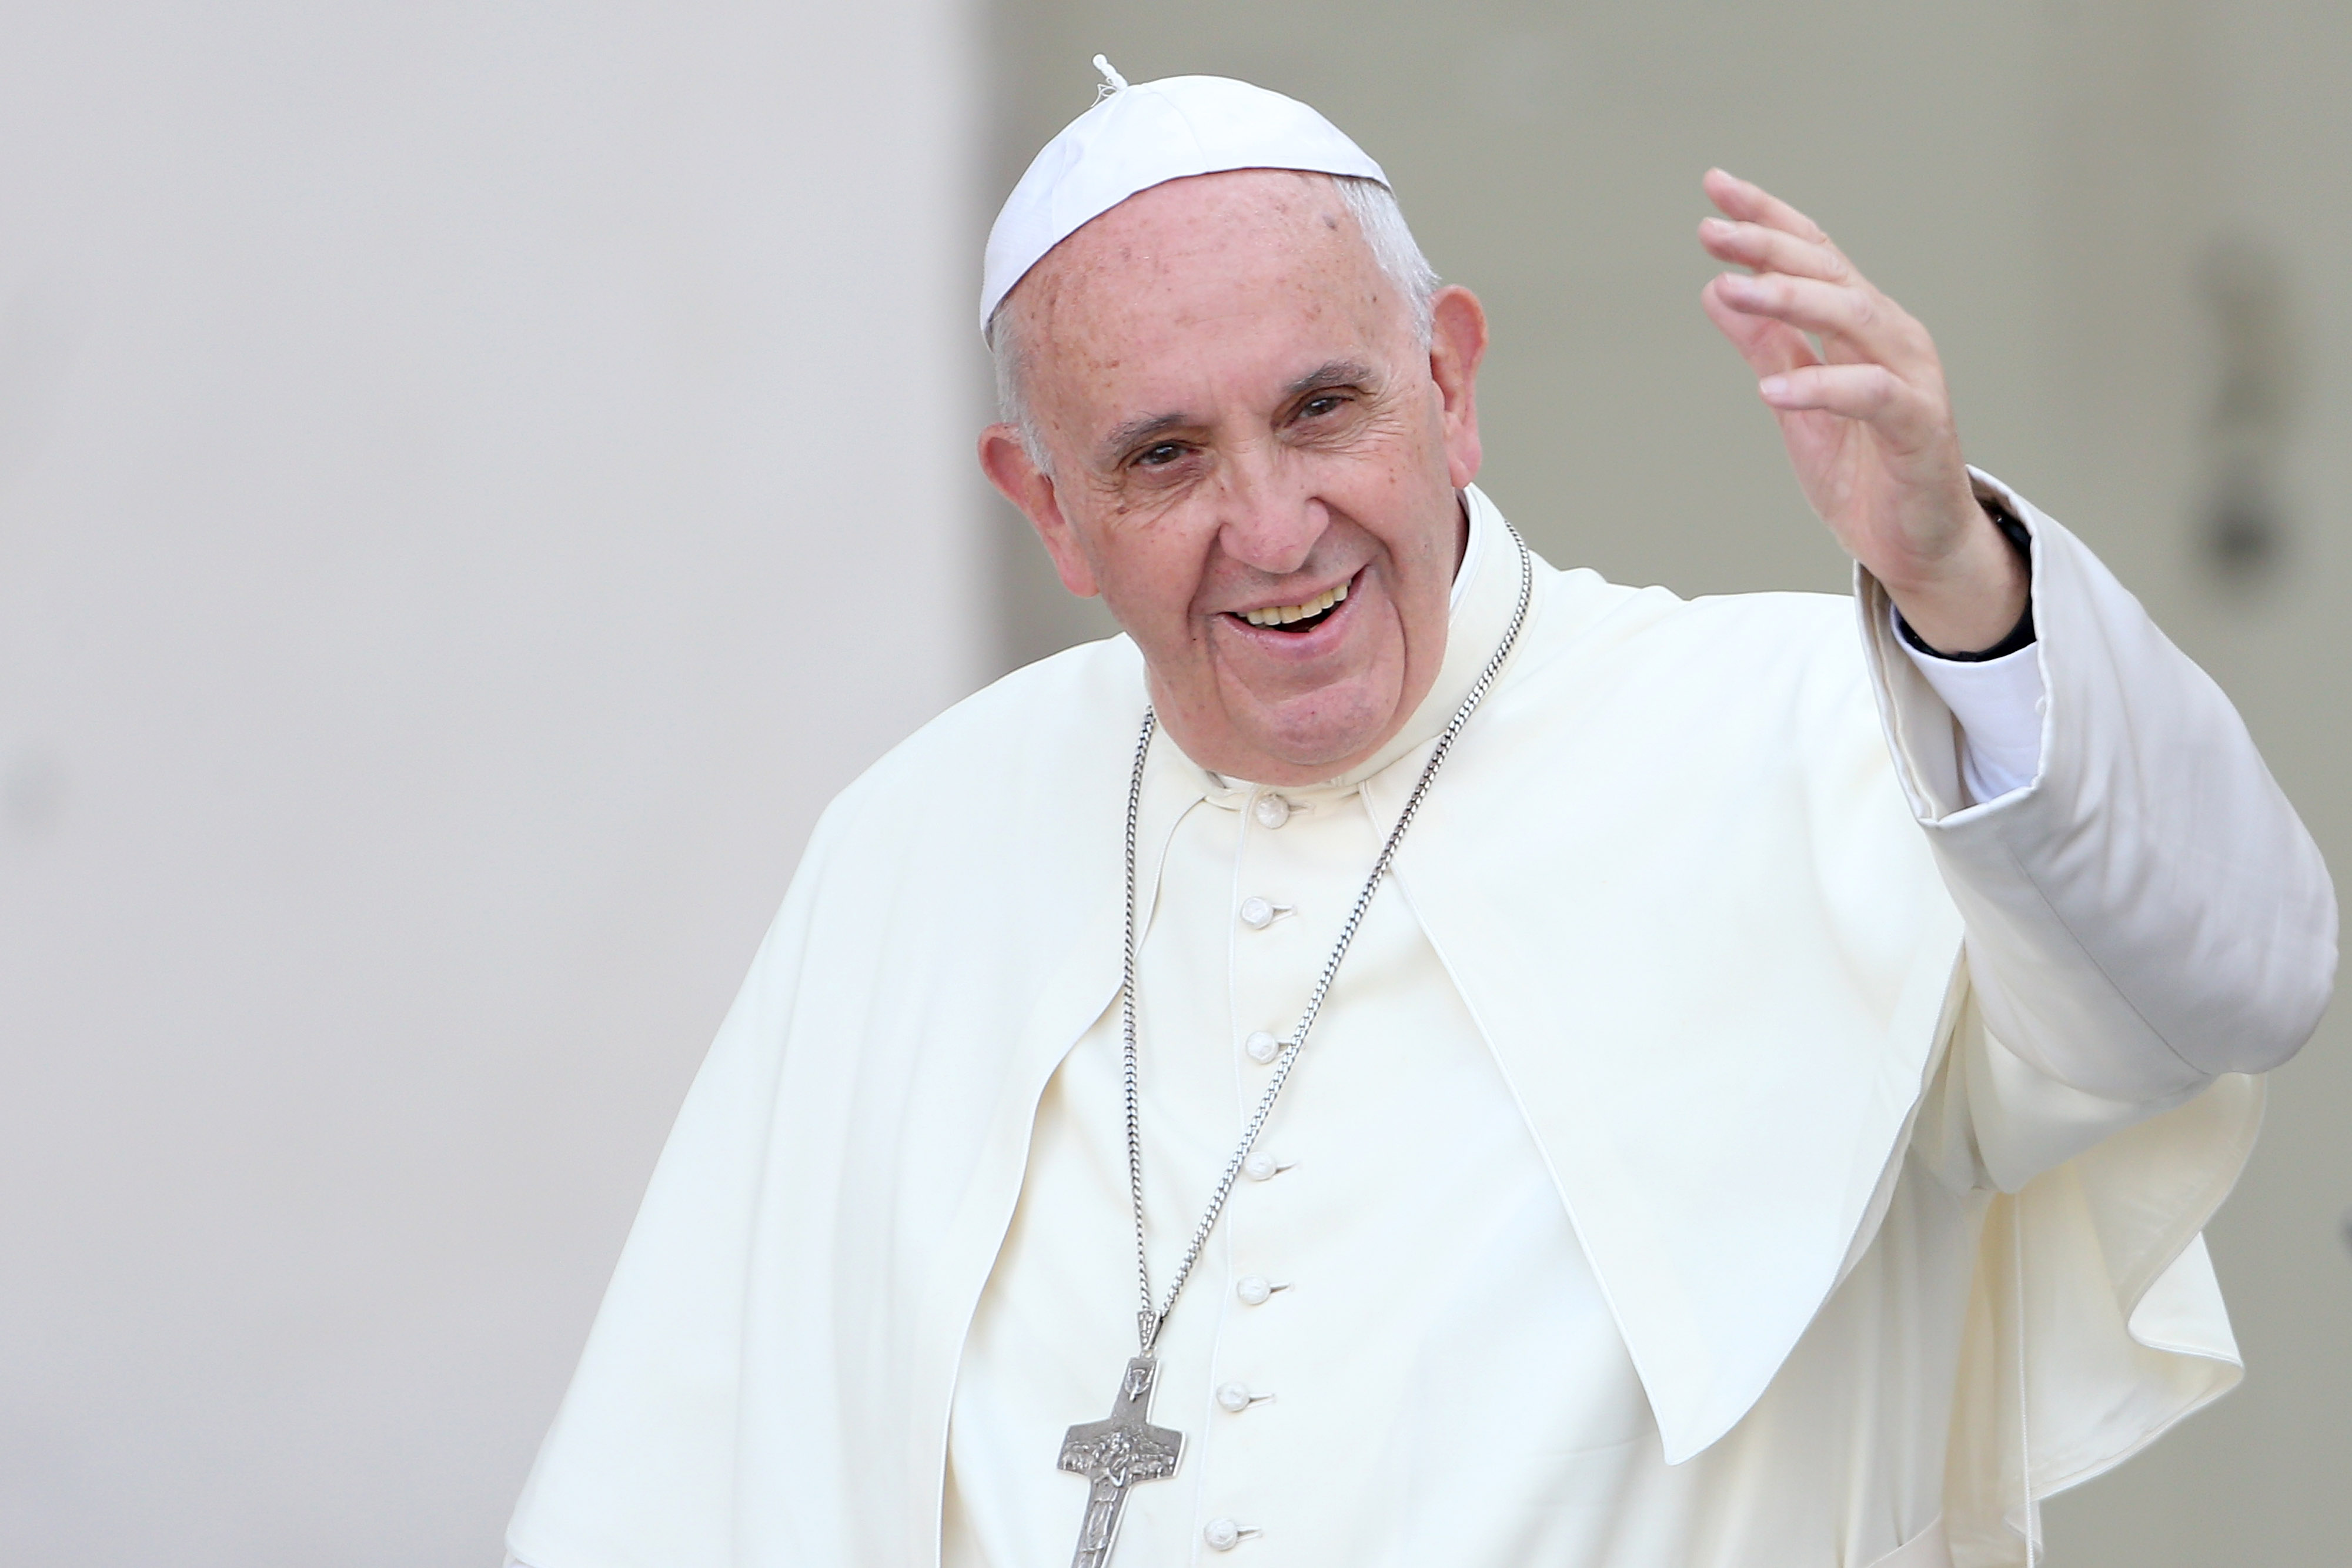 Pope Francis waves to the faithful as he arrives in St. Peter's Square for a meeting with the Roman Diocesans on June 14, 2015 in Vatican City.